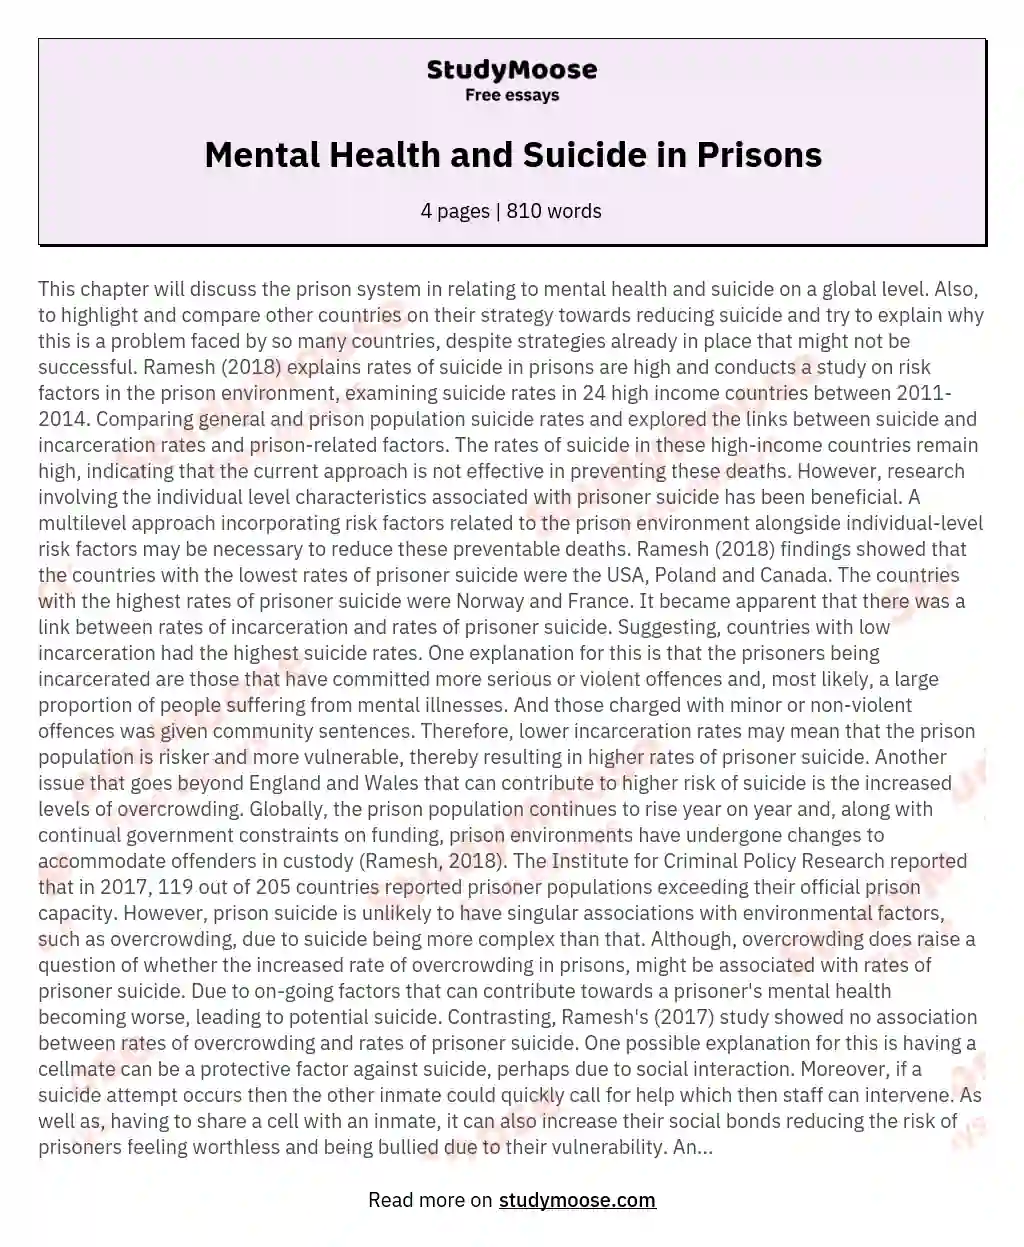 Mental Health and Suicide in Prisons essay